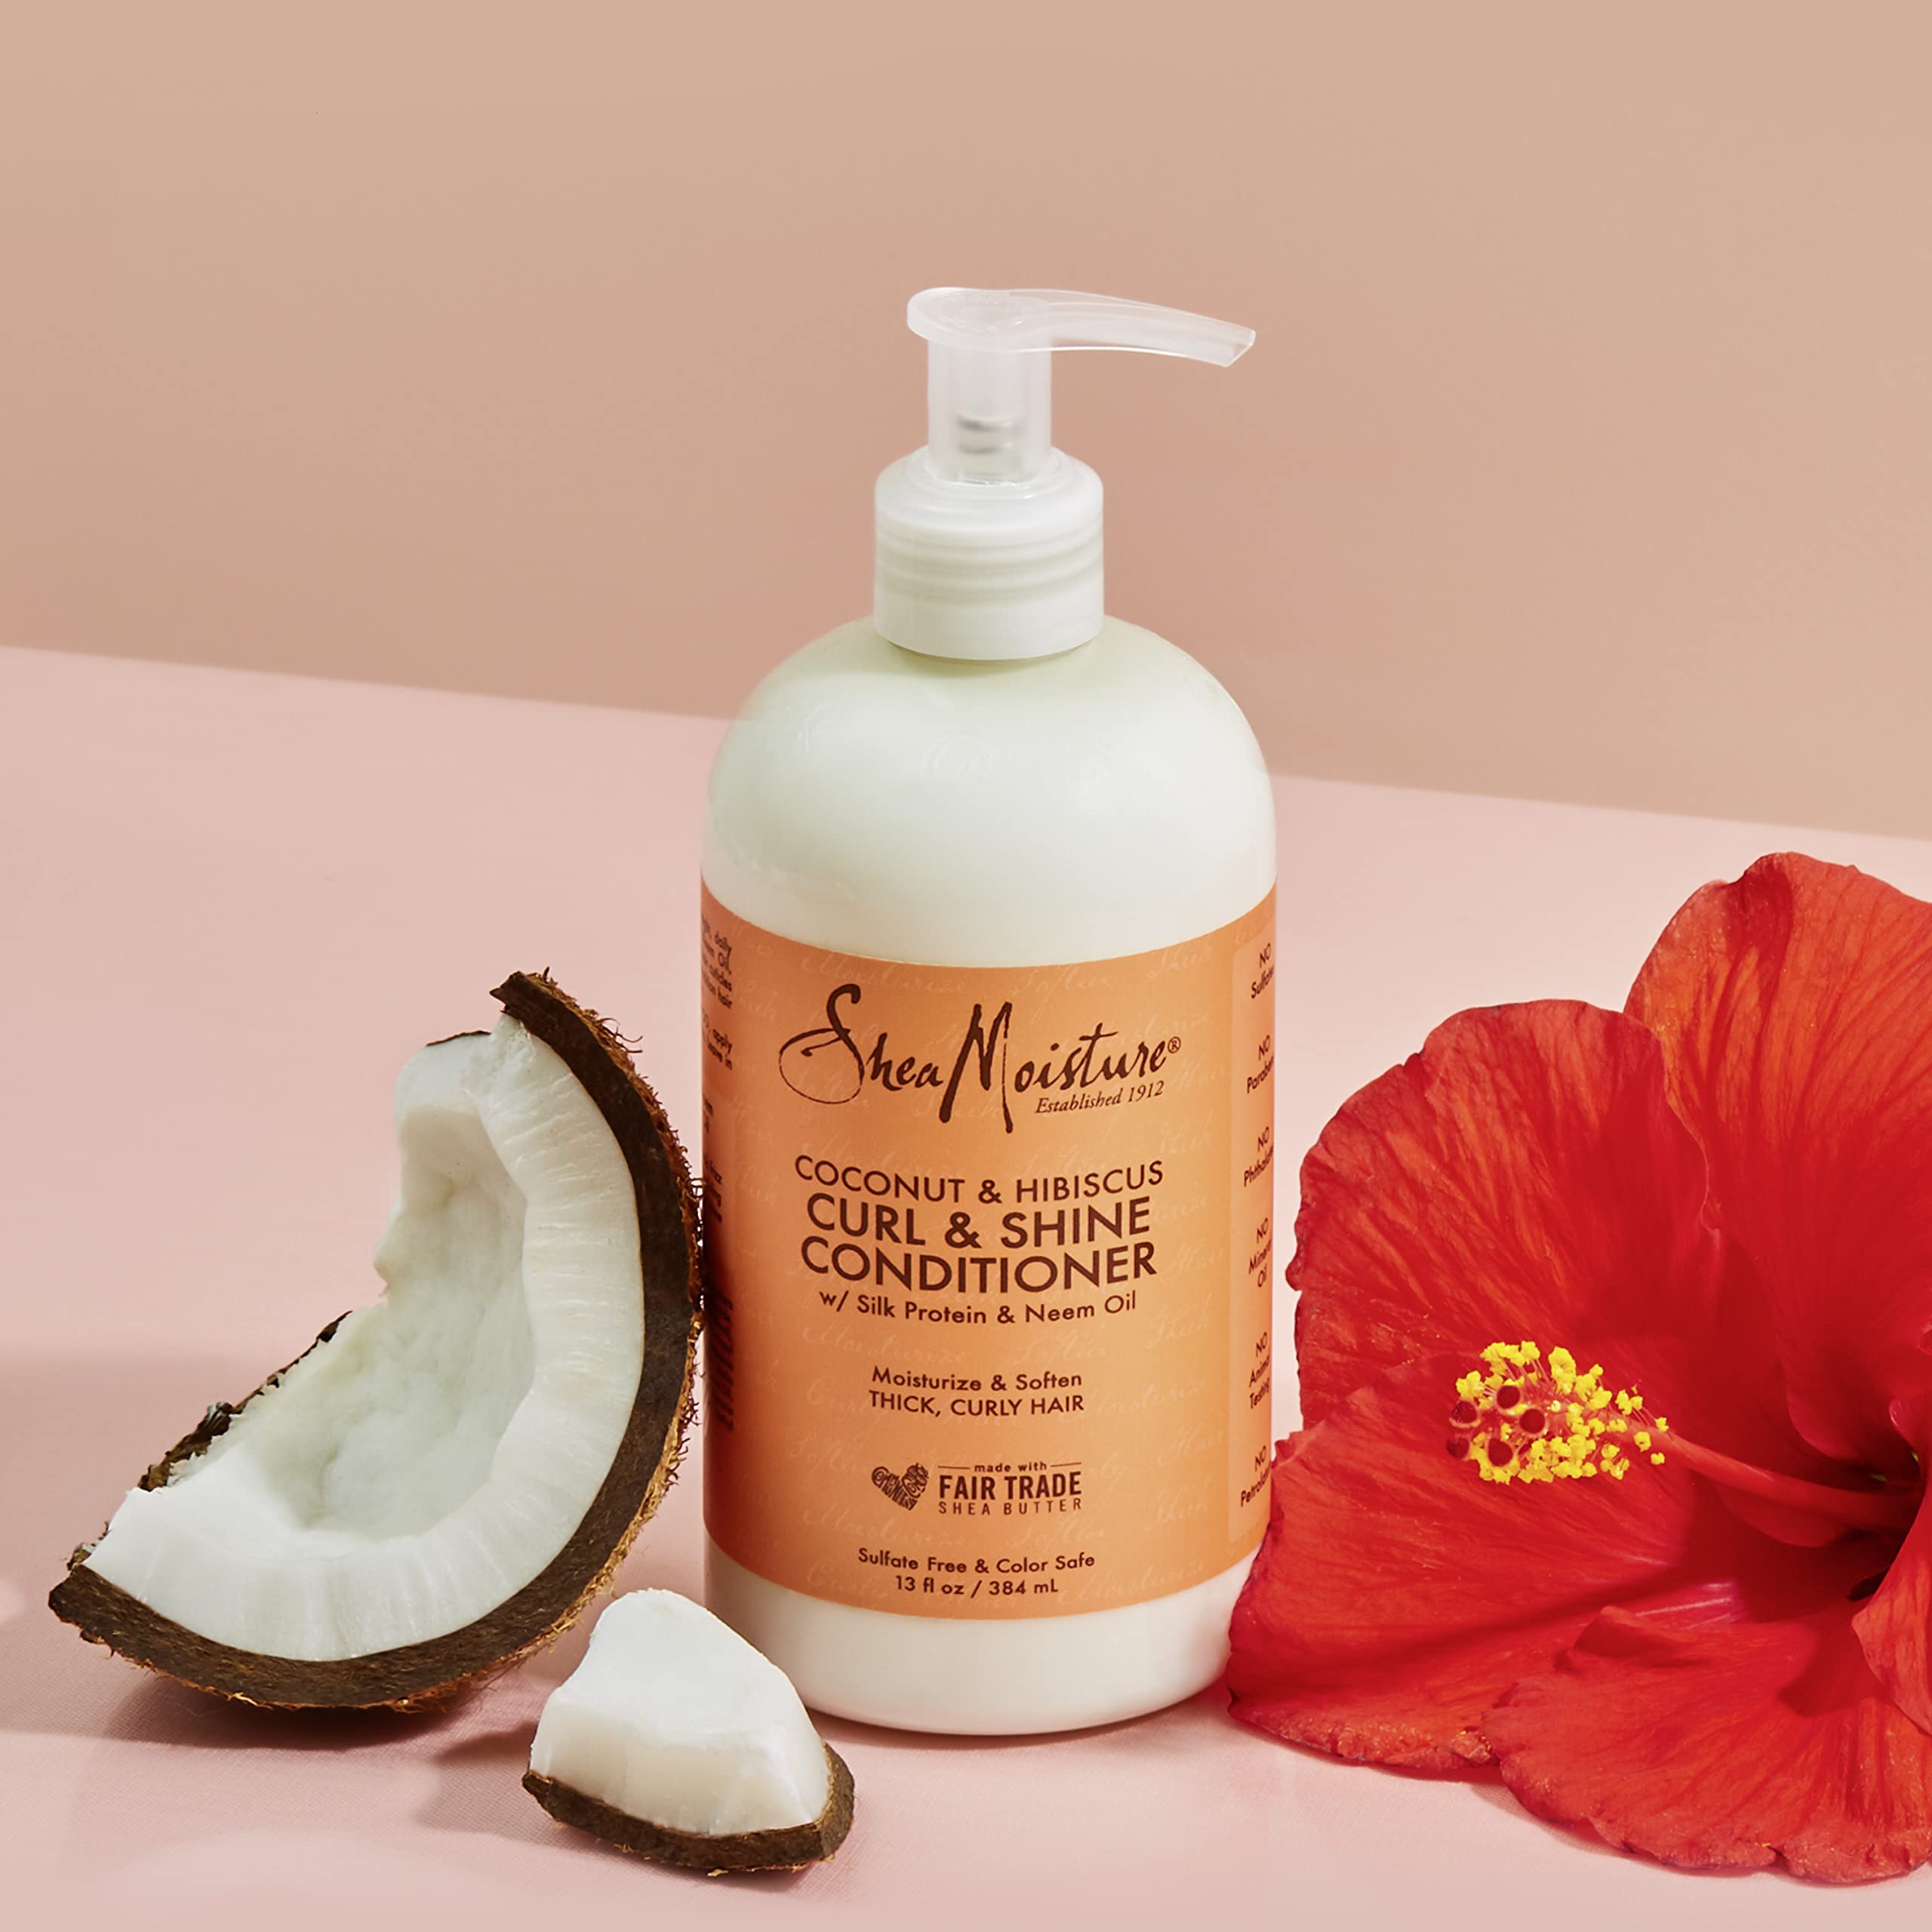 SheaMoisture Conditioner Curl and Shine Silicone Free for Curly Hair Coconut Hibiscus Moisturize & Define 13oz.